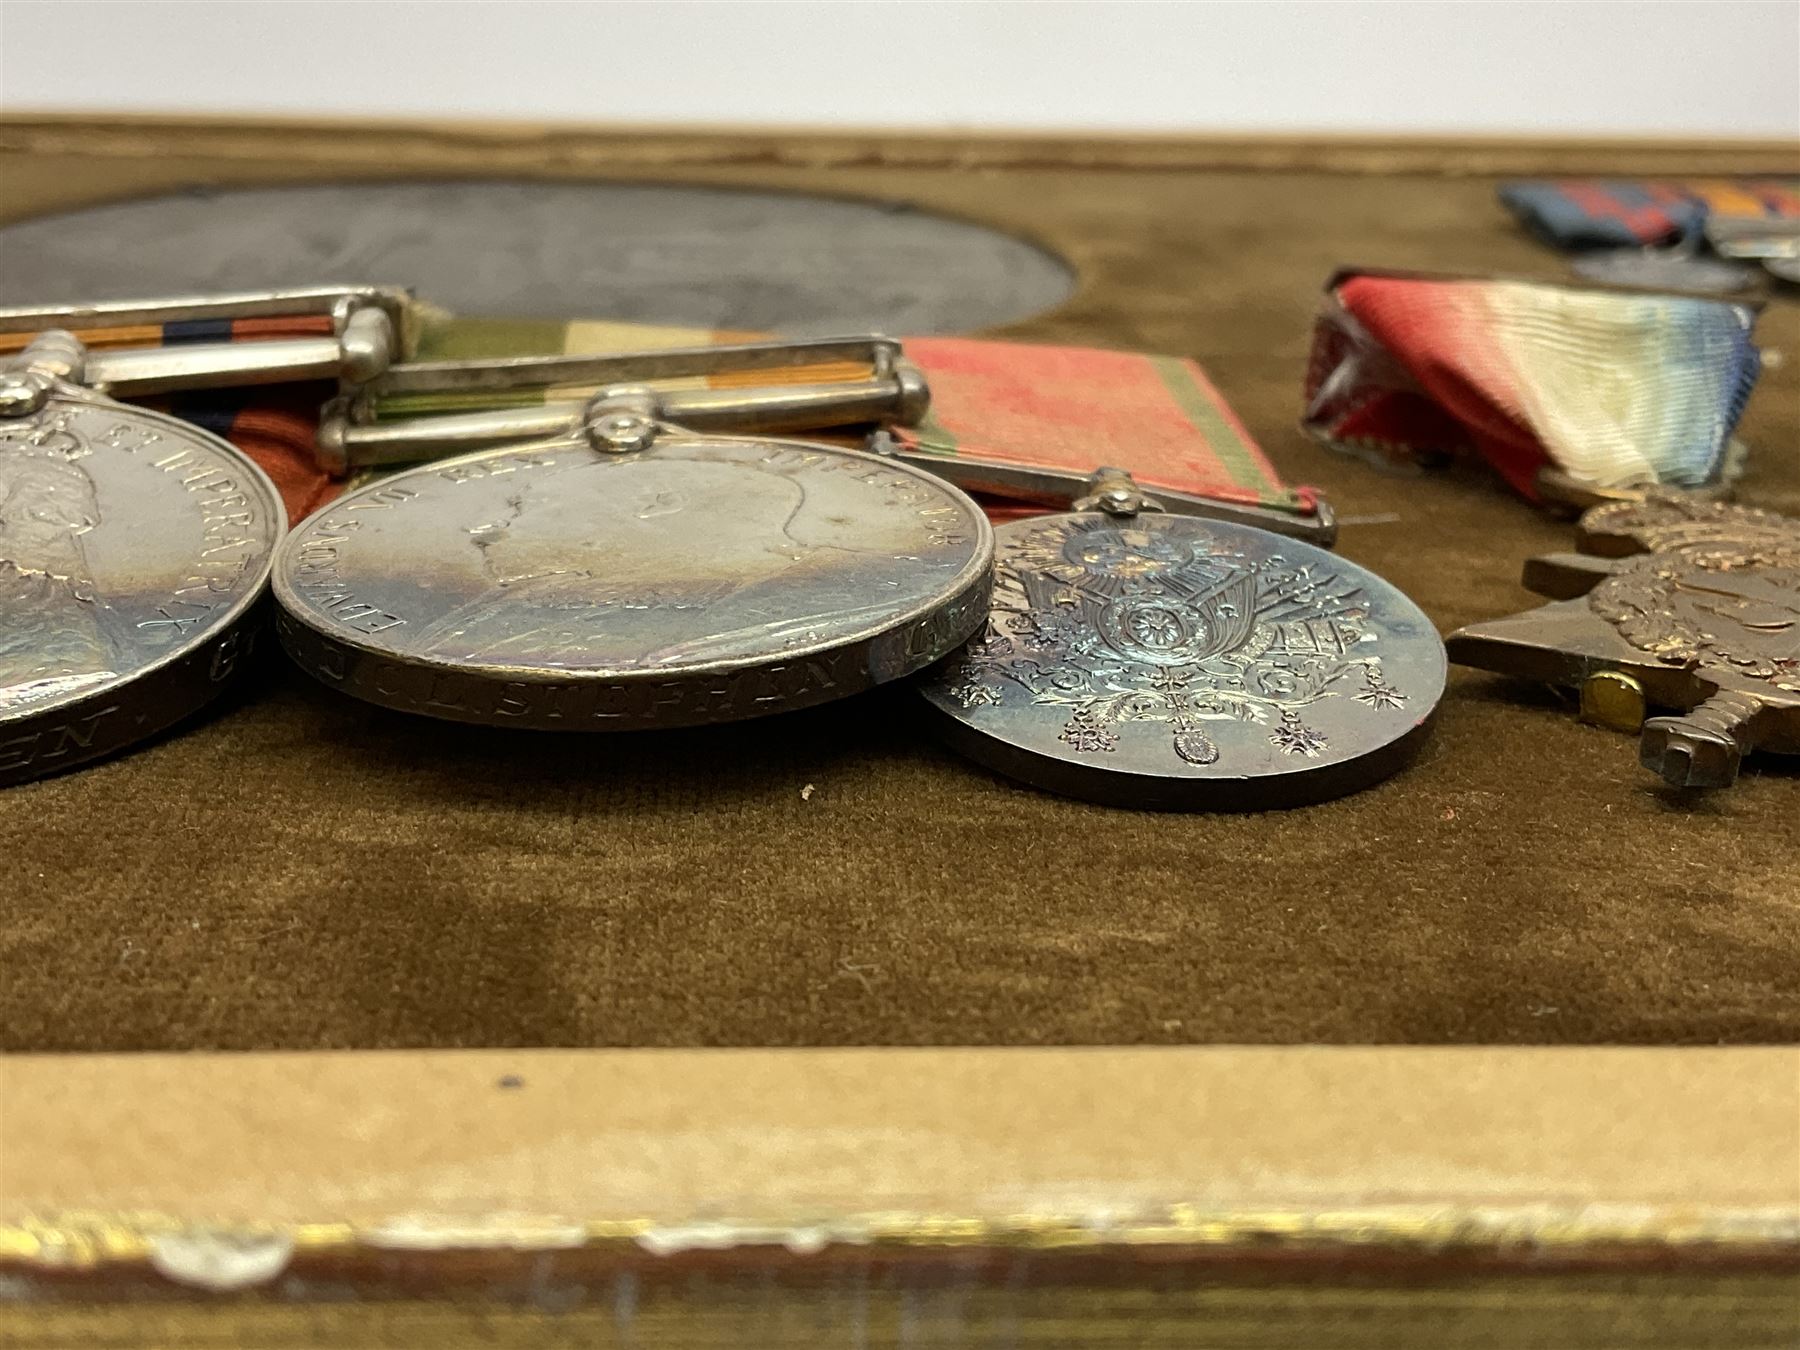 DOW Eure-et-Loir group of seven Boer War/WW1 medals comprising Queens South Africa Medal with three - Image 8 of 18